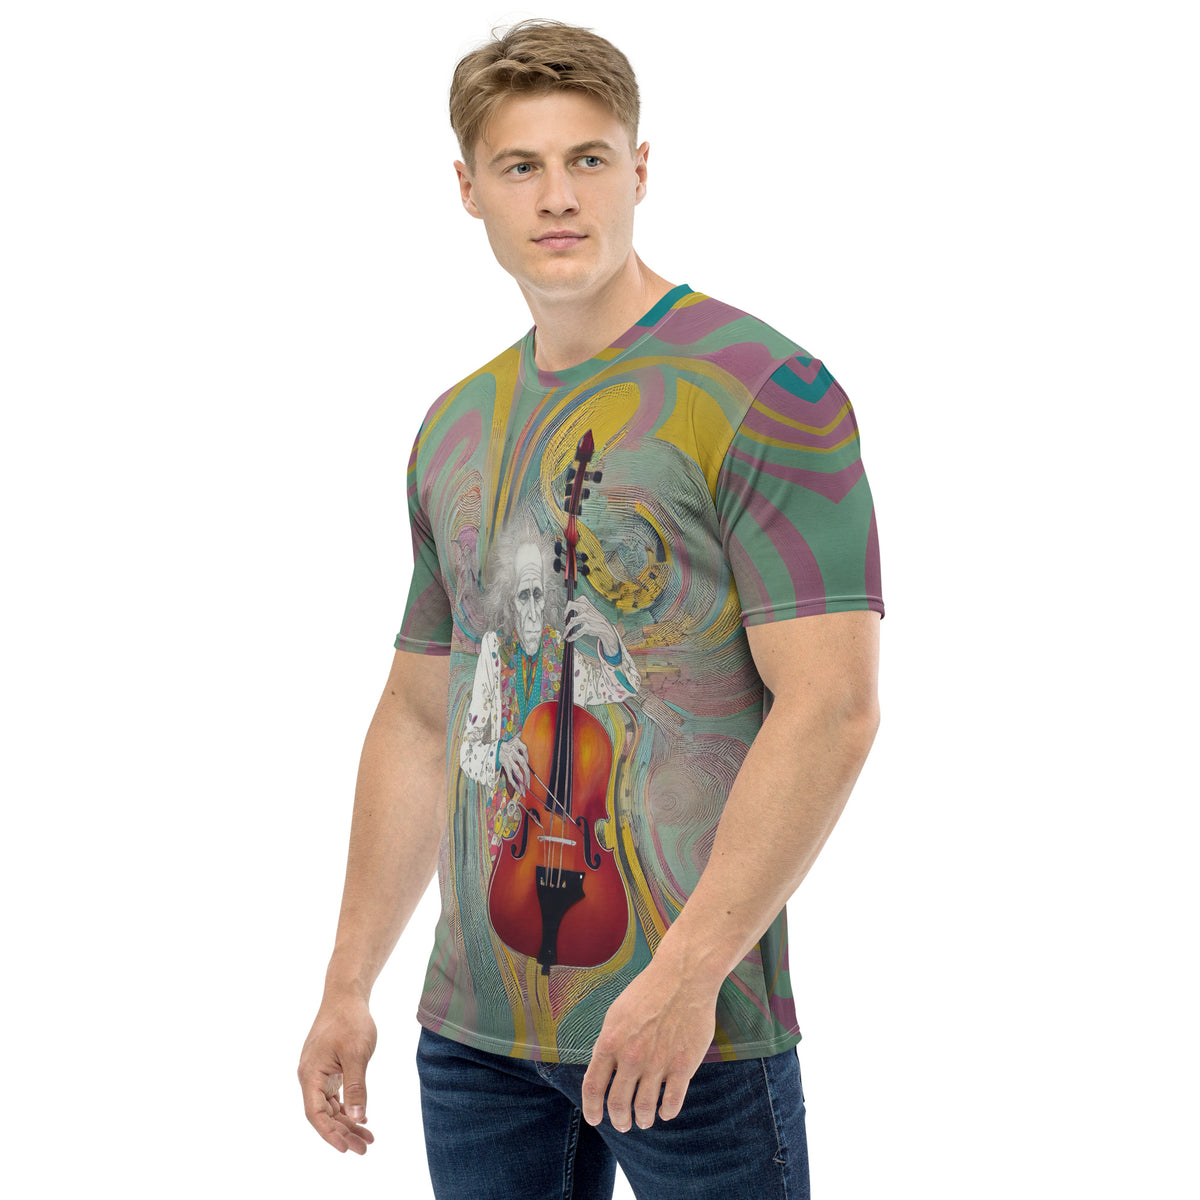 Whimsical Meadow Men's Tee with Floral Design